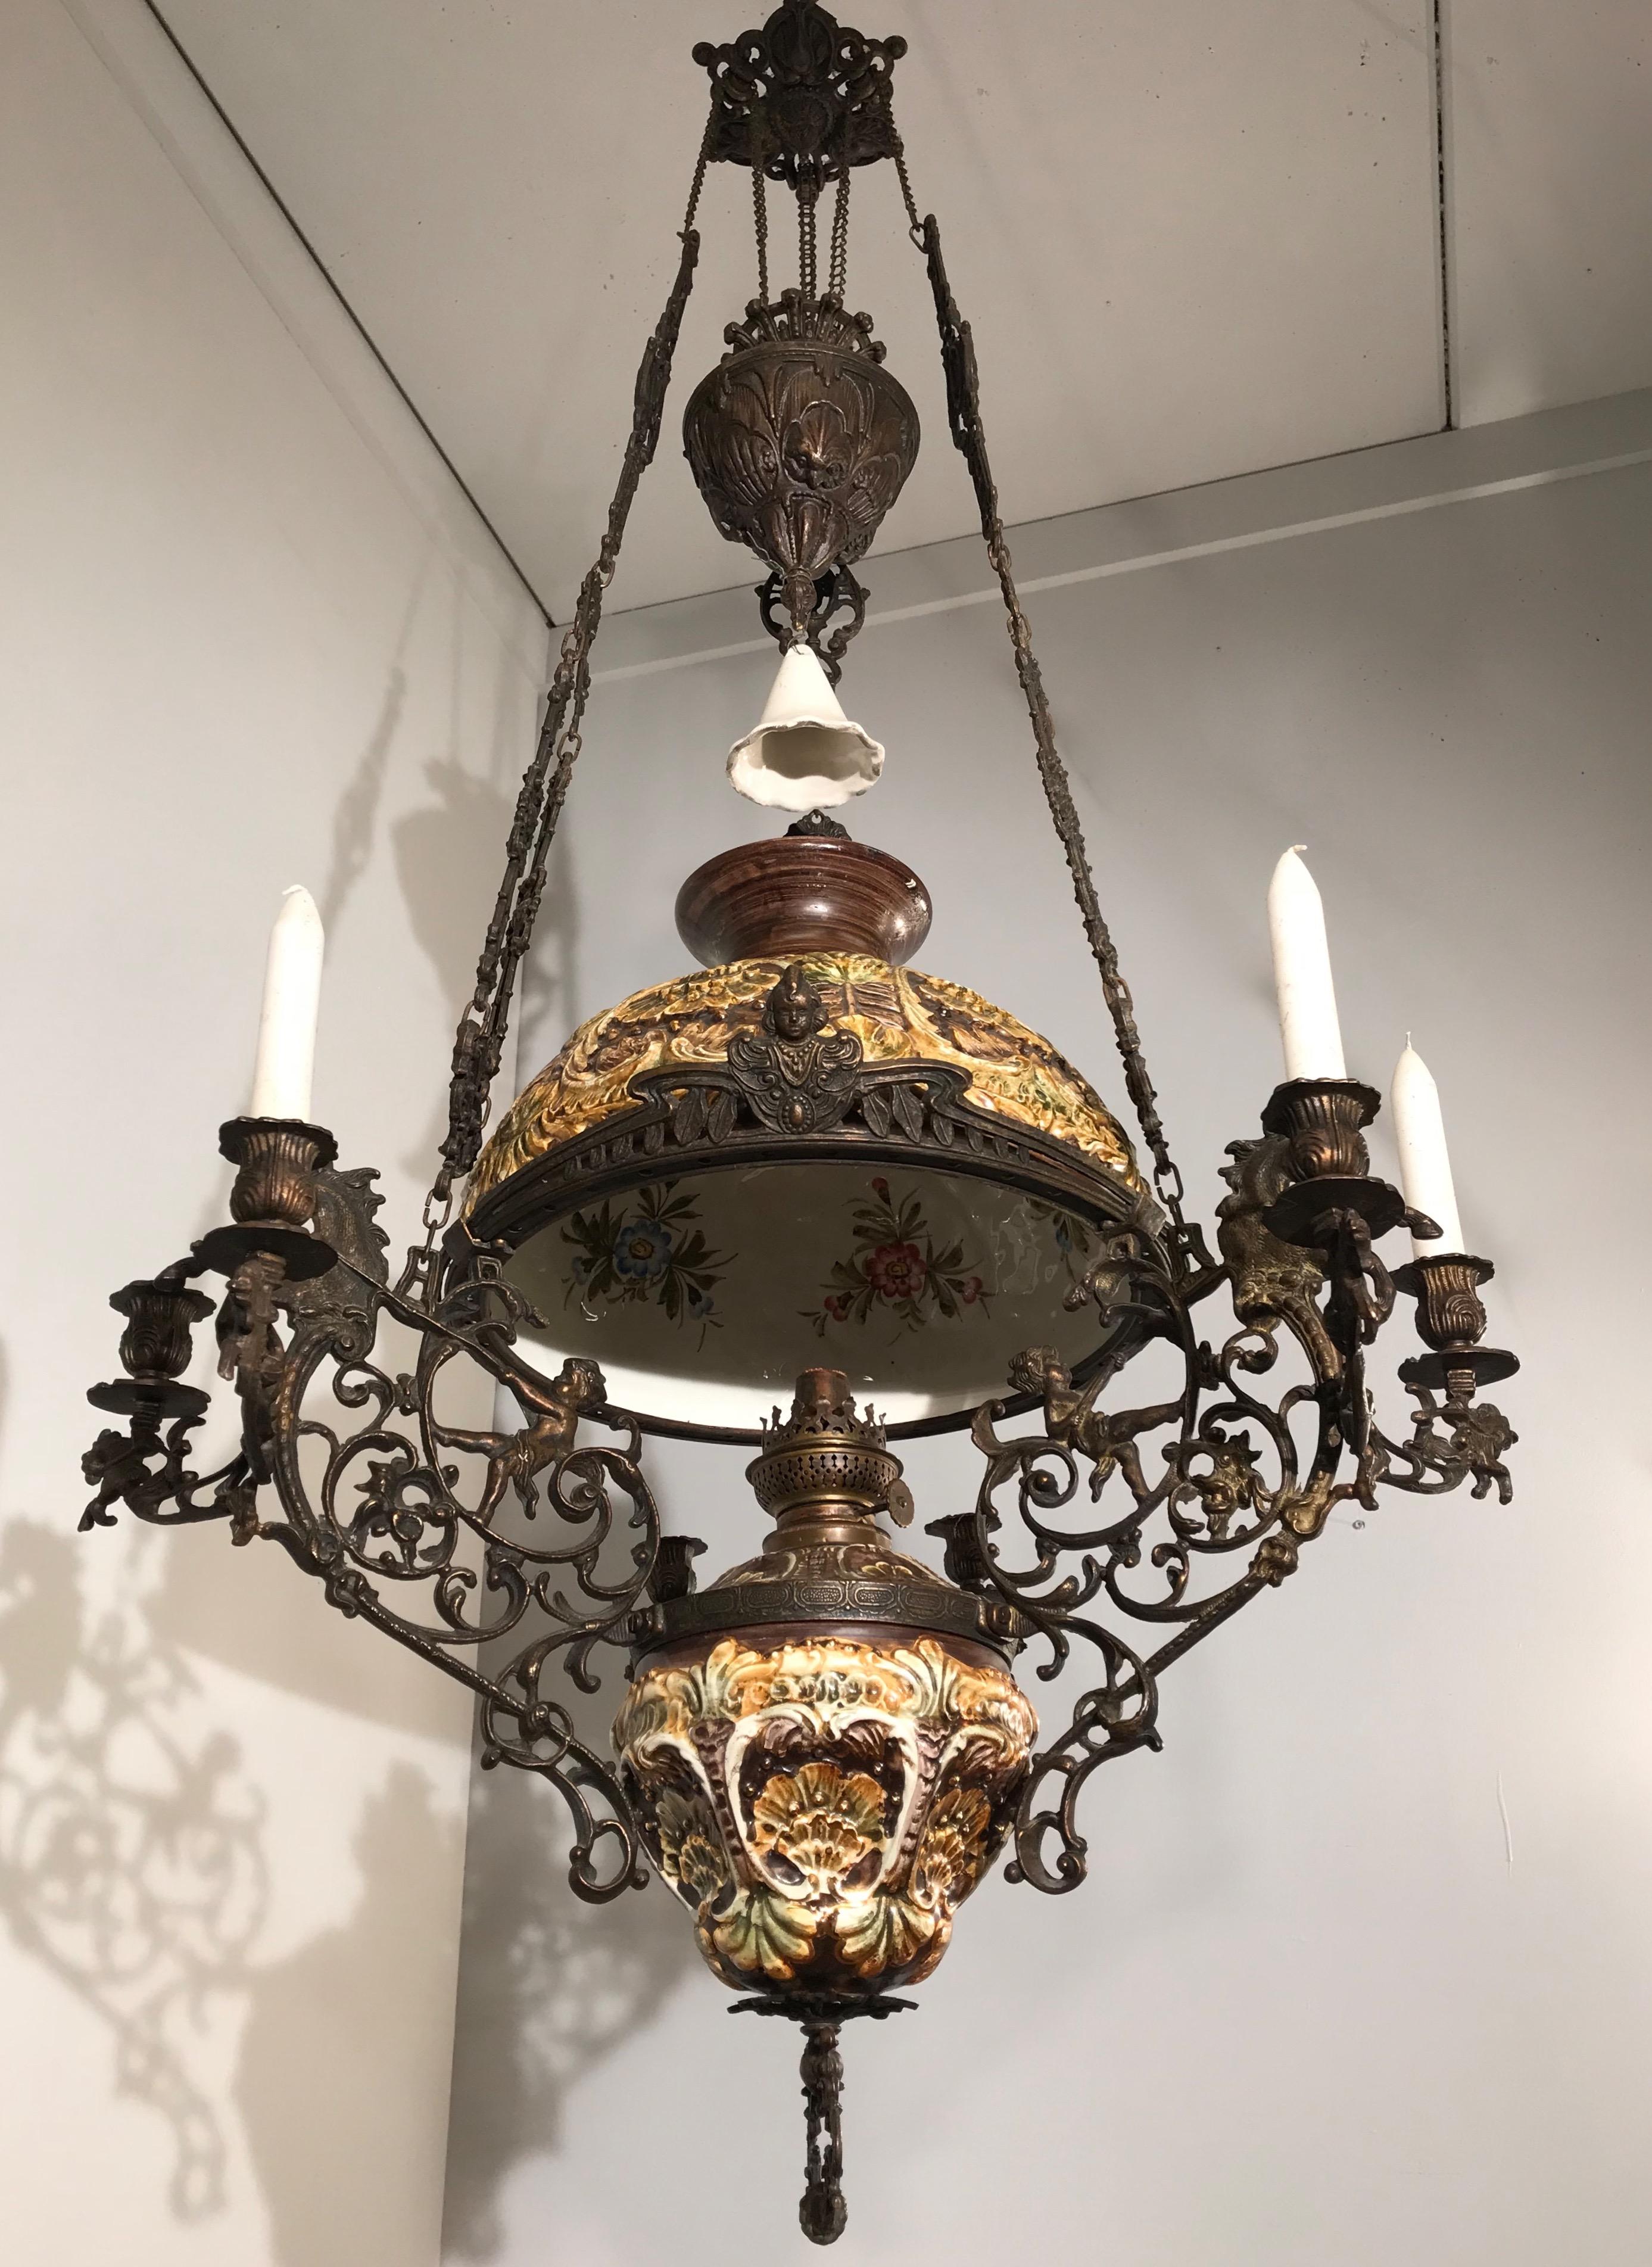 Rare figural oil lamp and chandelier into one.

This large and impressive oil lamp dates from the Arts & Crafts era. It is made of very expensive materials and techniques. This is one of the reasons why this rare antique is such a striking piece.